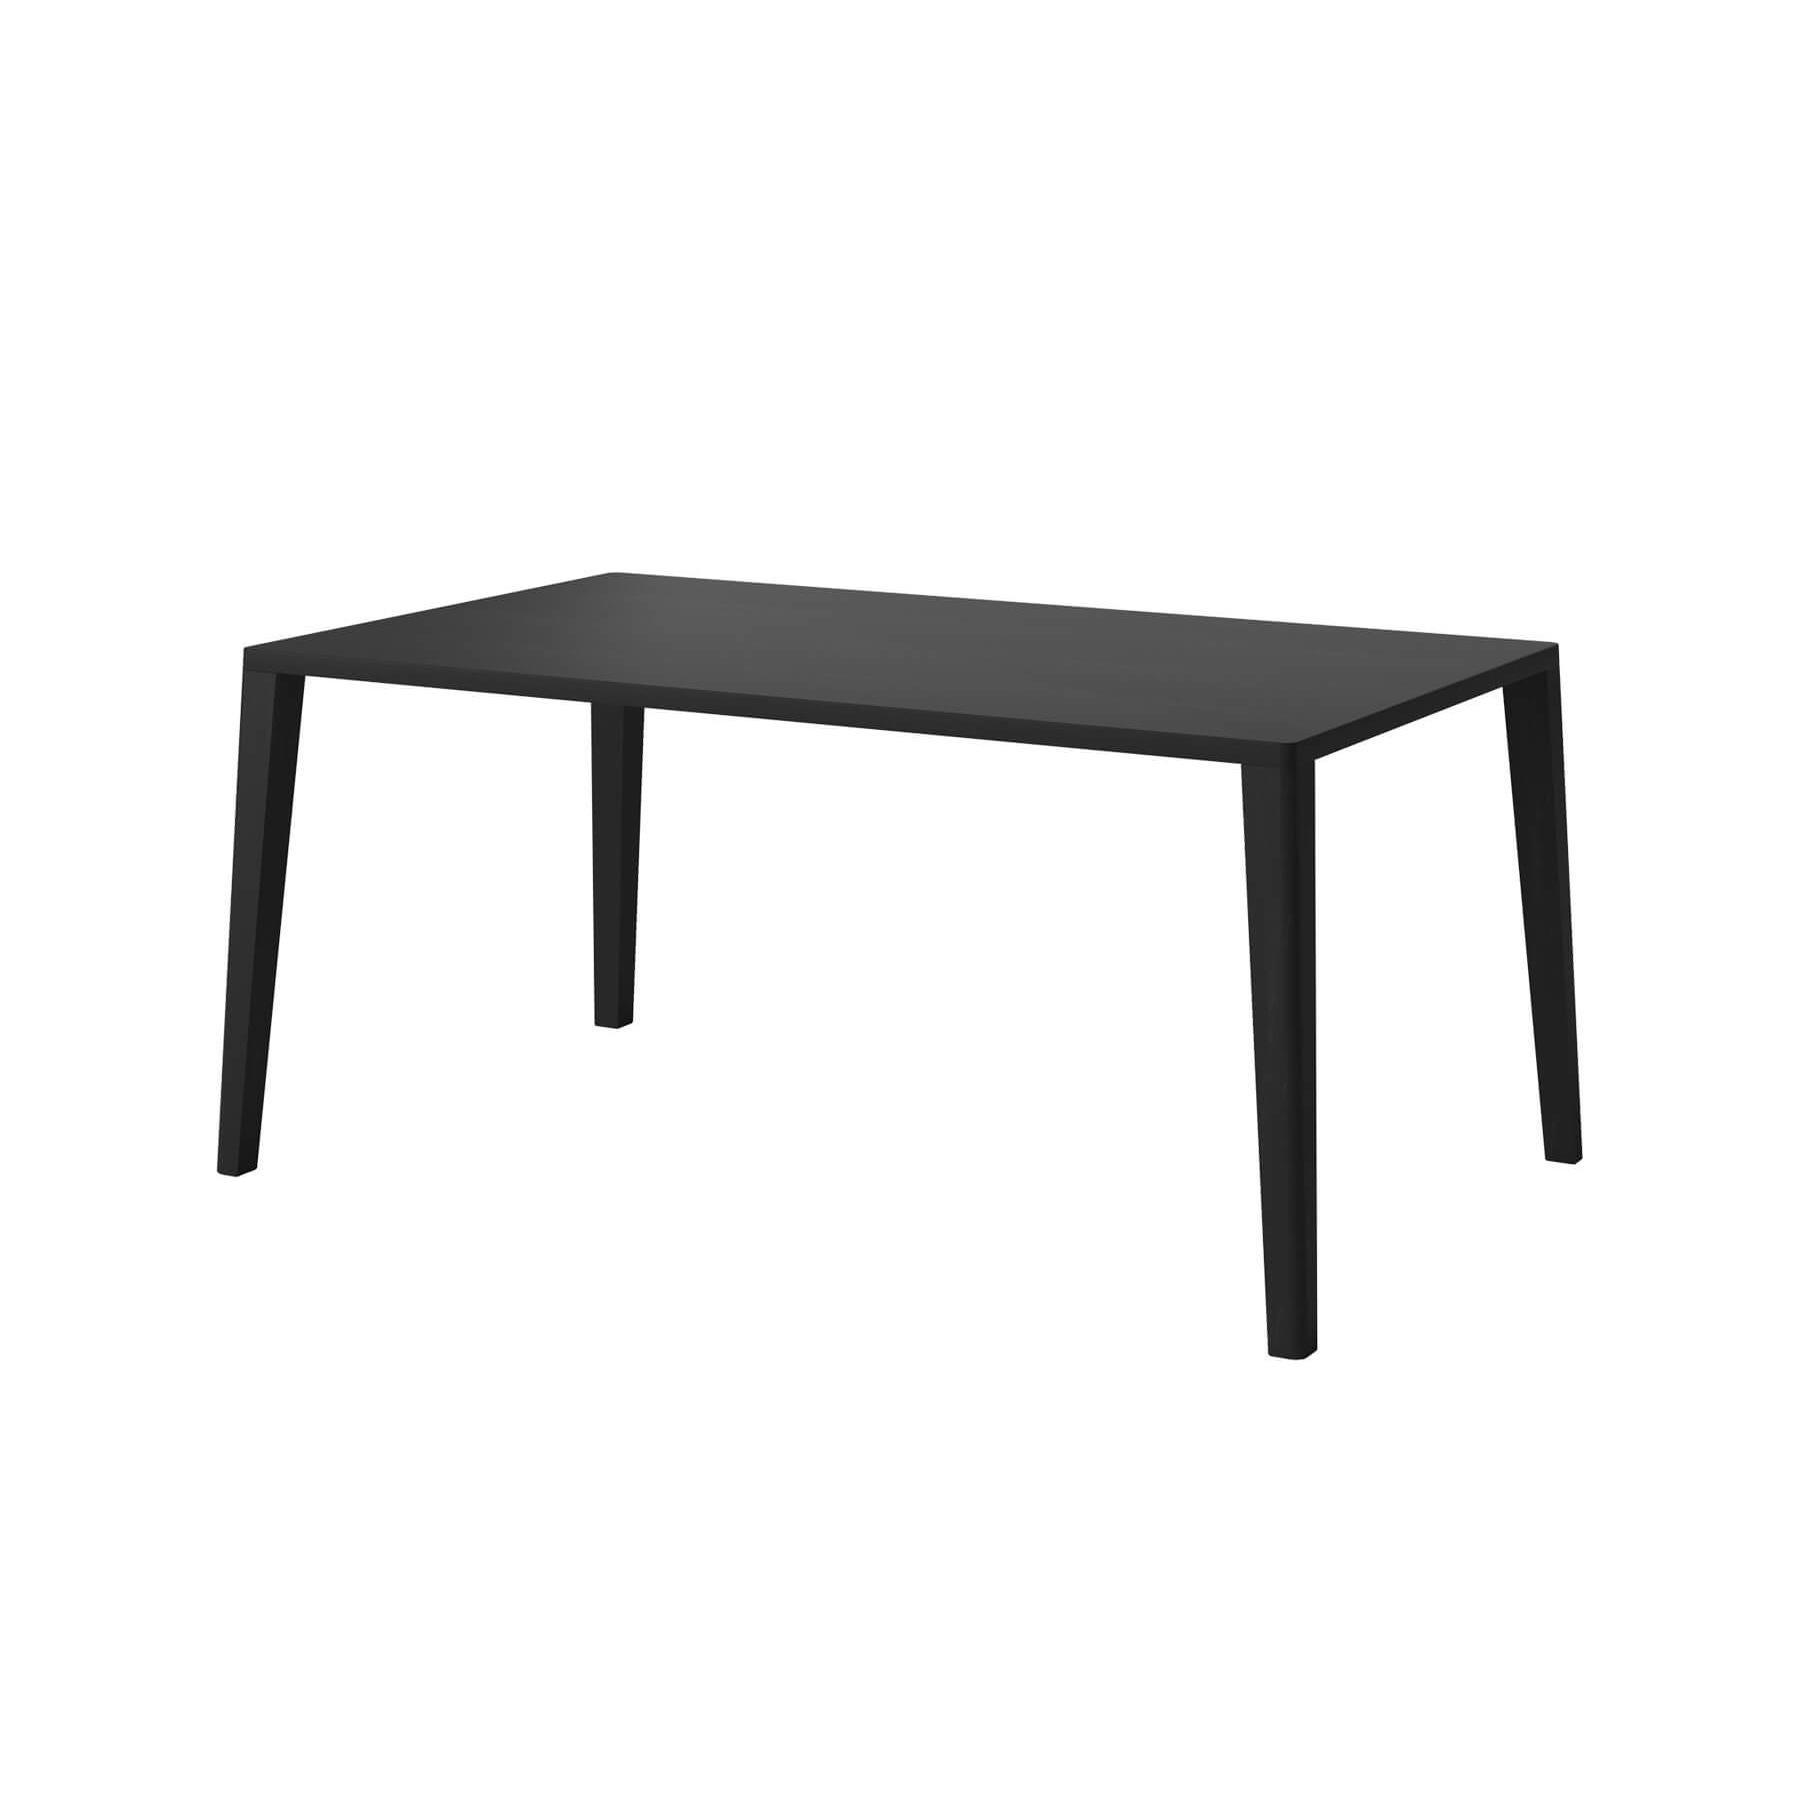 Bolia Graceful Dining Table 160 X 95cm Black Stained With Extension Leaves Designer Furniture From Holloways Of Ludlow